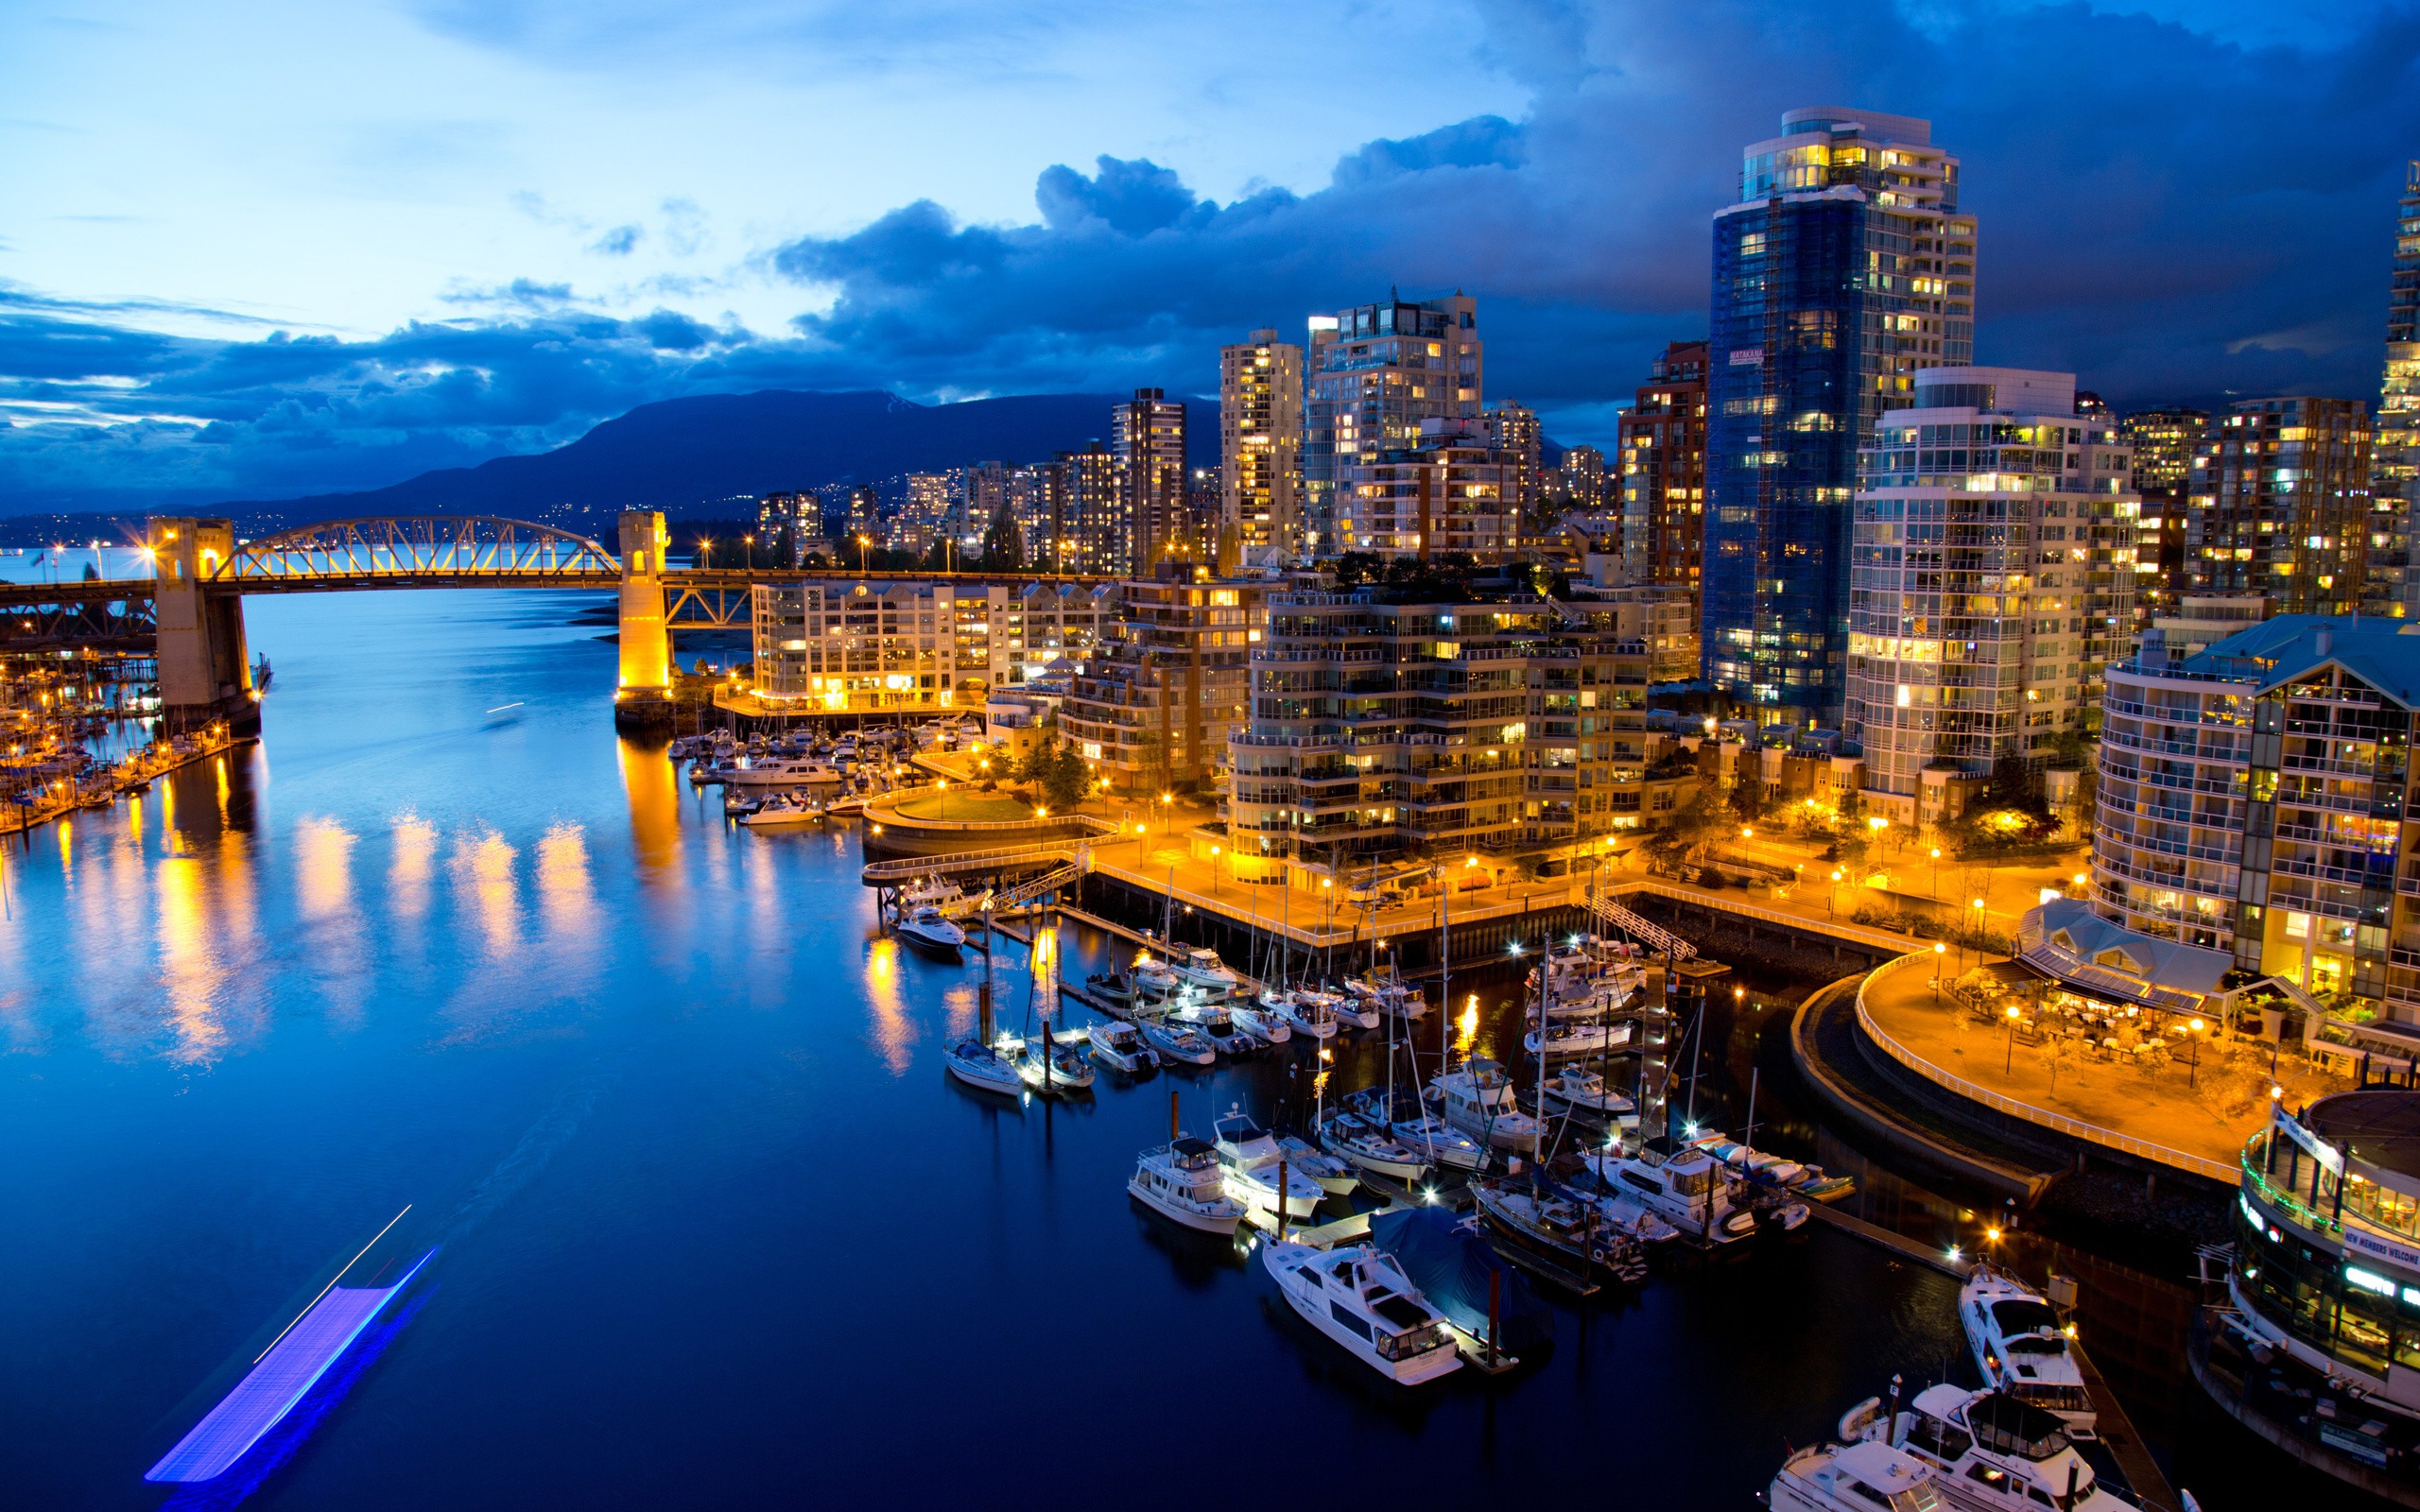 vancouver, Canada, Cities, Hdr, Night, Lights, Architecture, Buildings, Water, Waterways, Marina, Harbor, Reflections, Vehicles, Boats, Sky, Skies, Clouds, Places Wallpaper